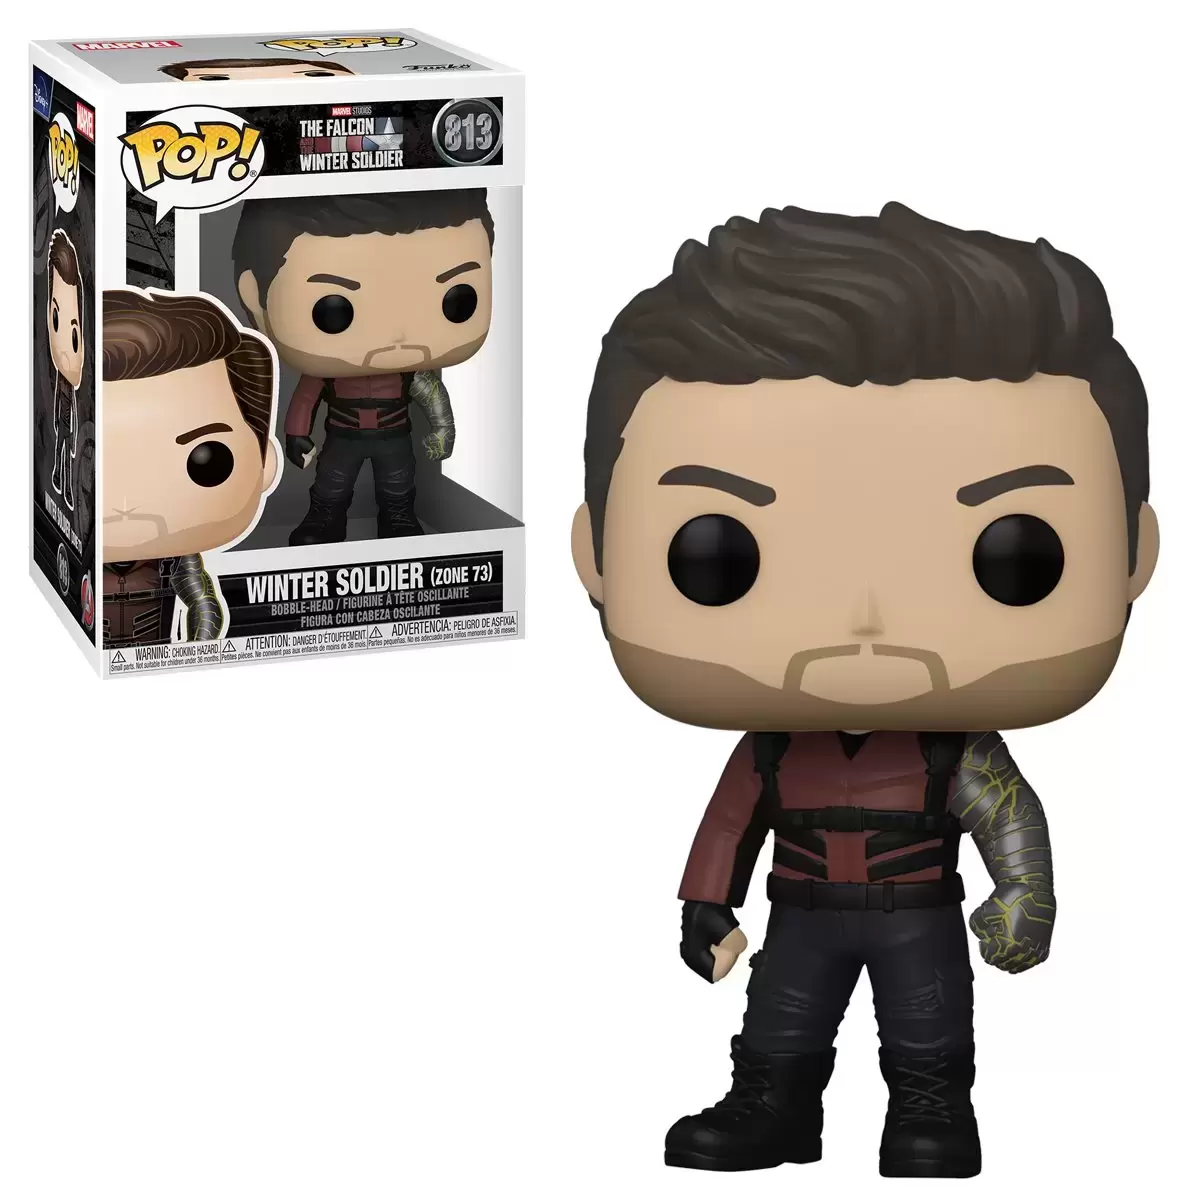 POP! MARVEL - The Falcon and The Winter Soldier - Winter Soldier (Zone 73)